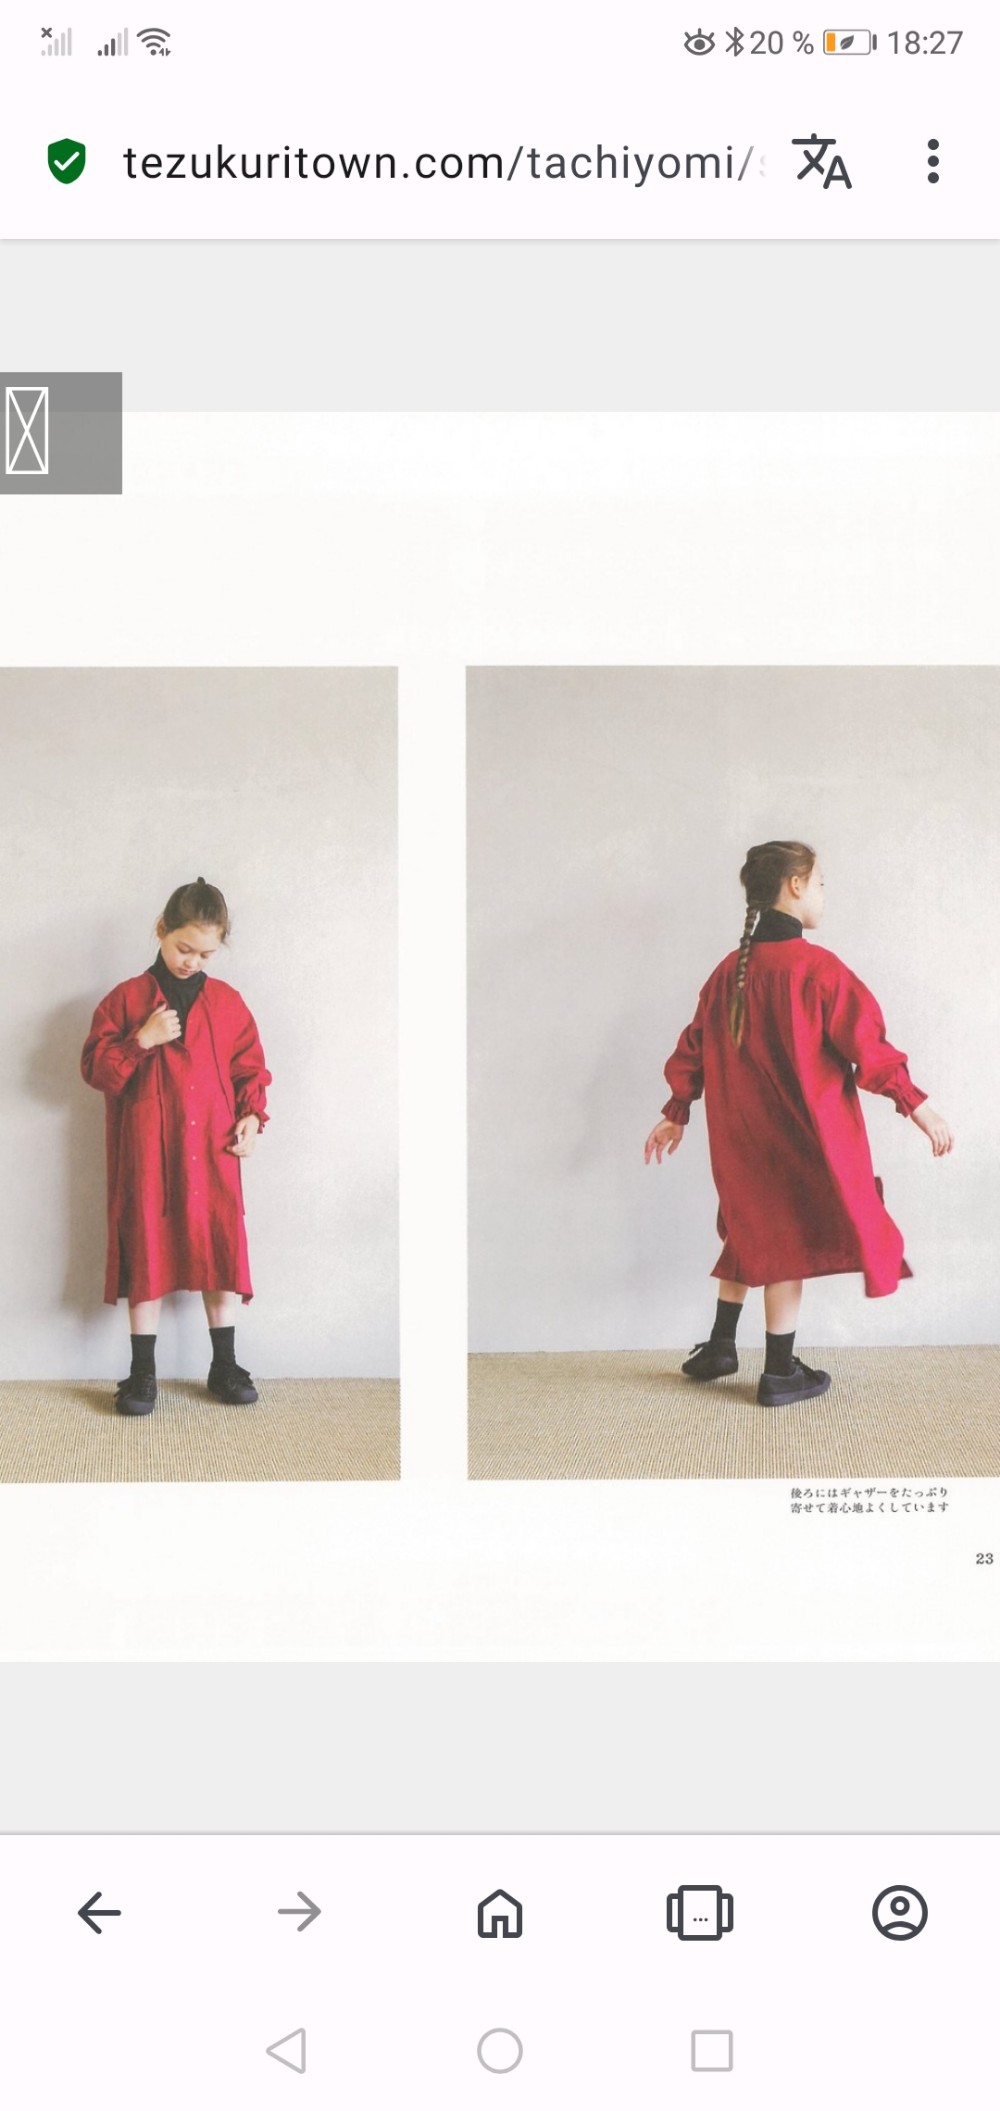 Clothing that resonates with both boys and girls